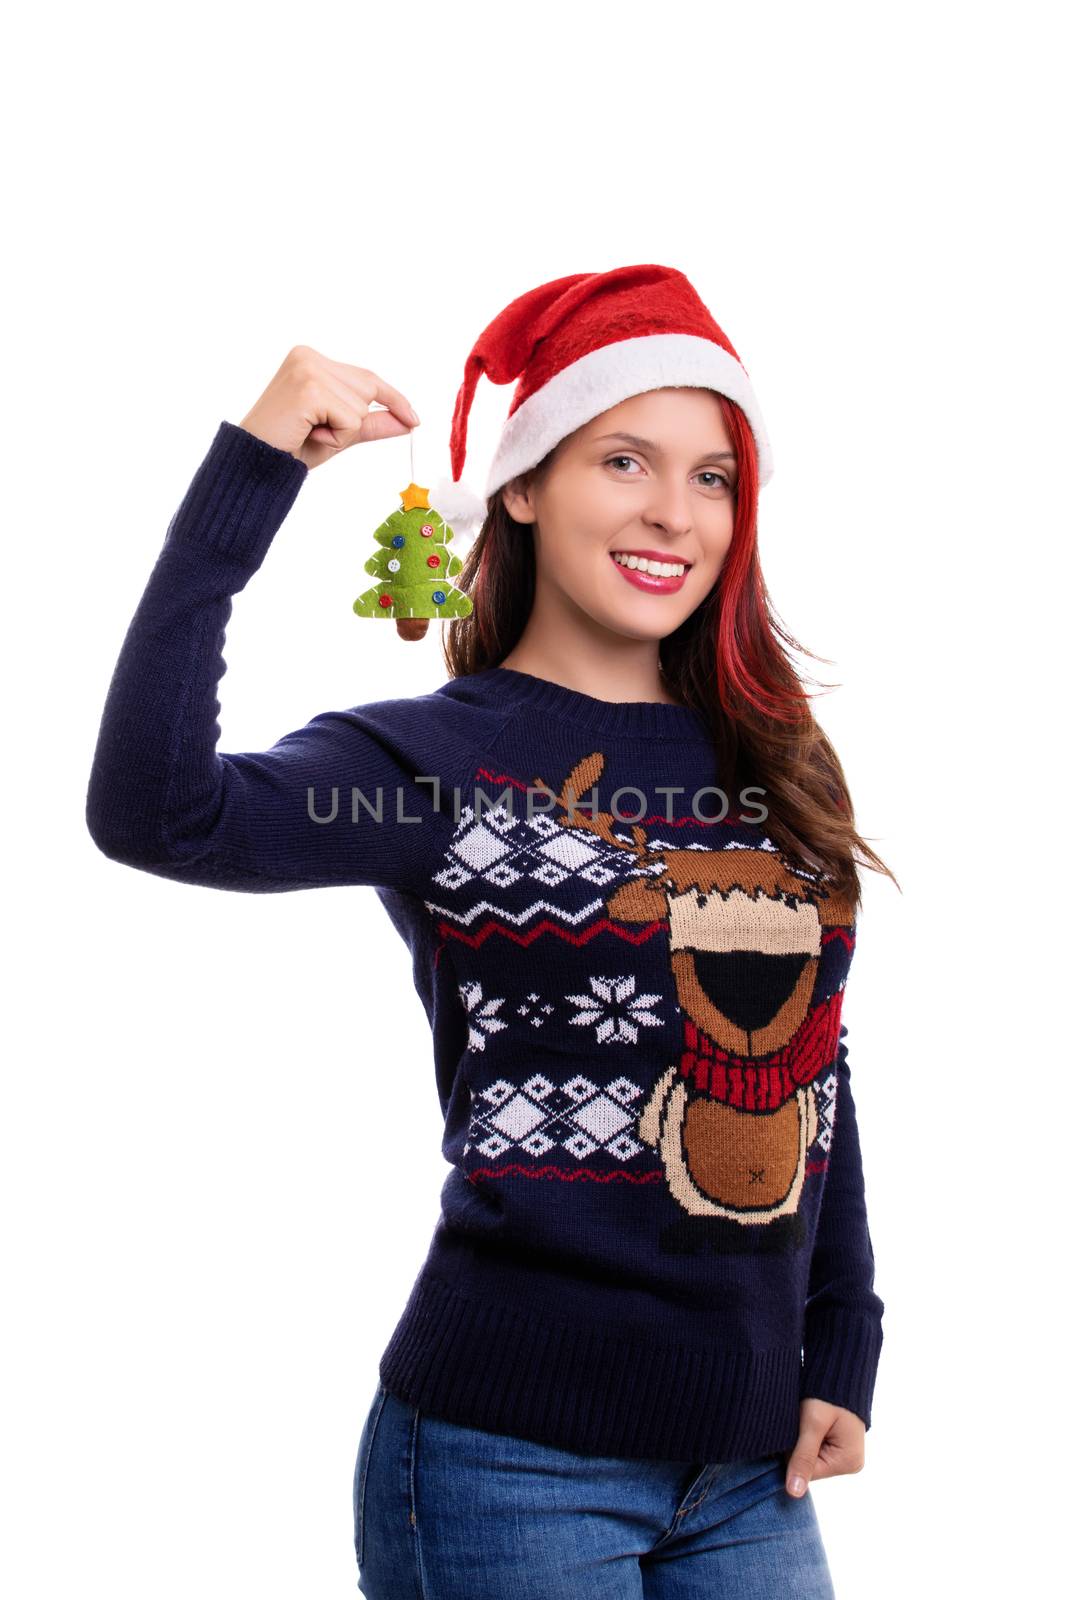 Beautiful smiling girl in a festive sweater with a Santa's hat on, holding a Christmas tree decoration, isolated on a white background.